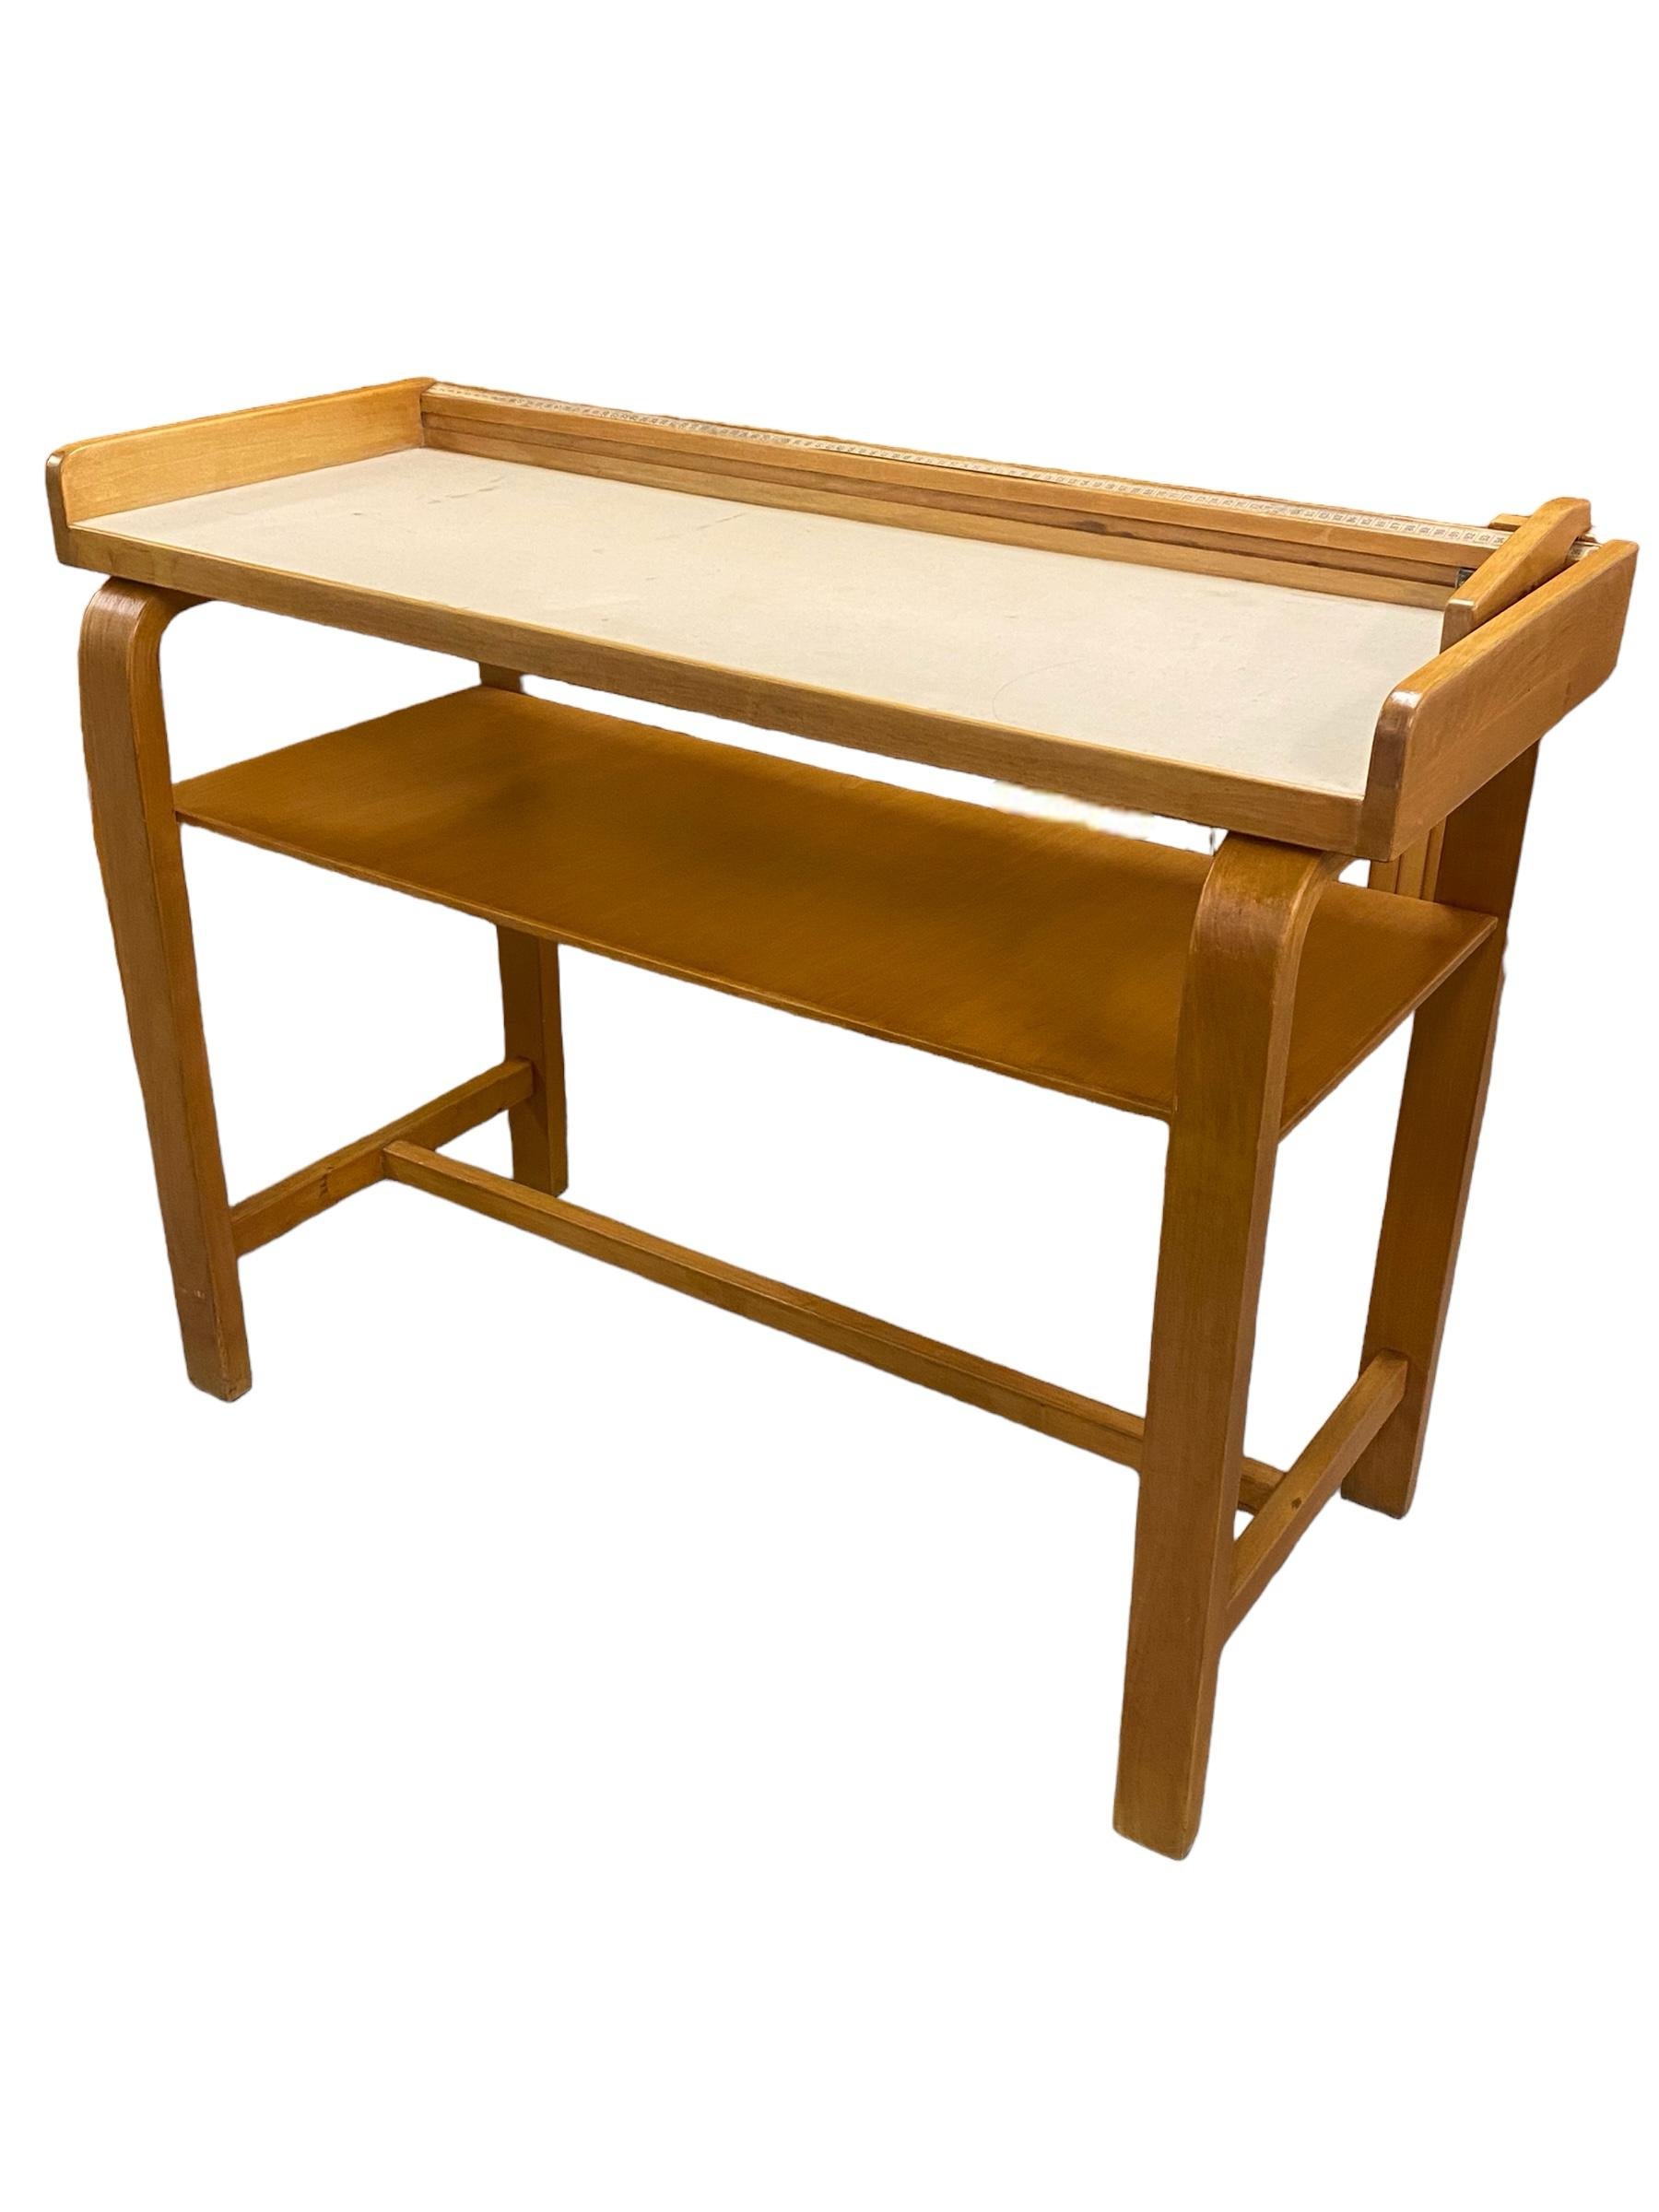 This table/sidetable was first designed as a measuring table for babies in hospitals. It has a metric measuring unit attached to it, and a sliding wooden piece to adjust according to the babies length.

Start from being a truly Aalto collector's